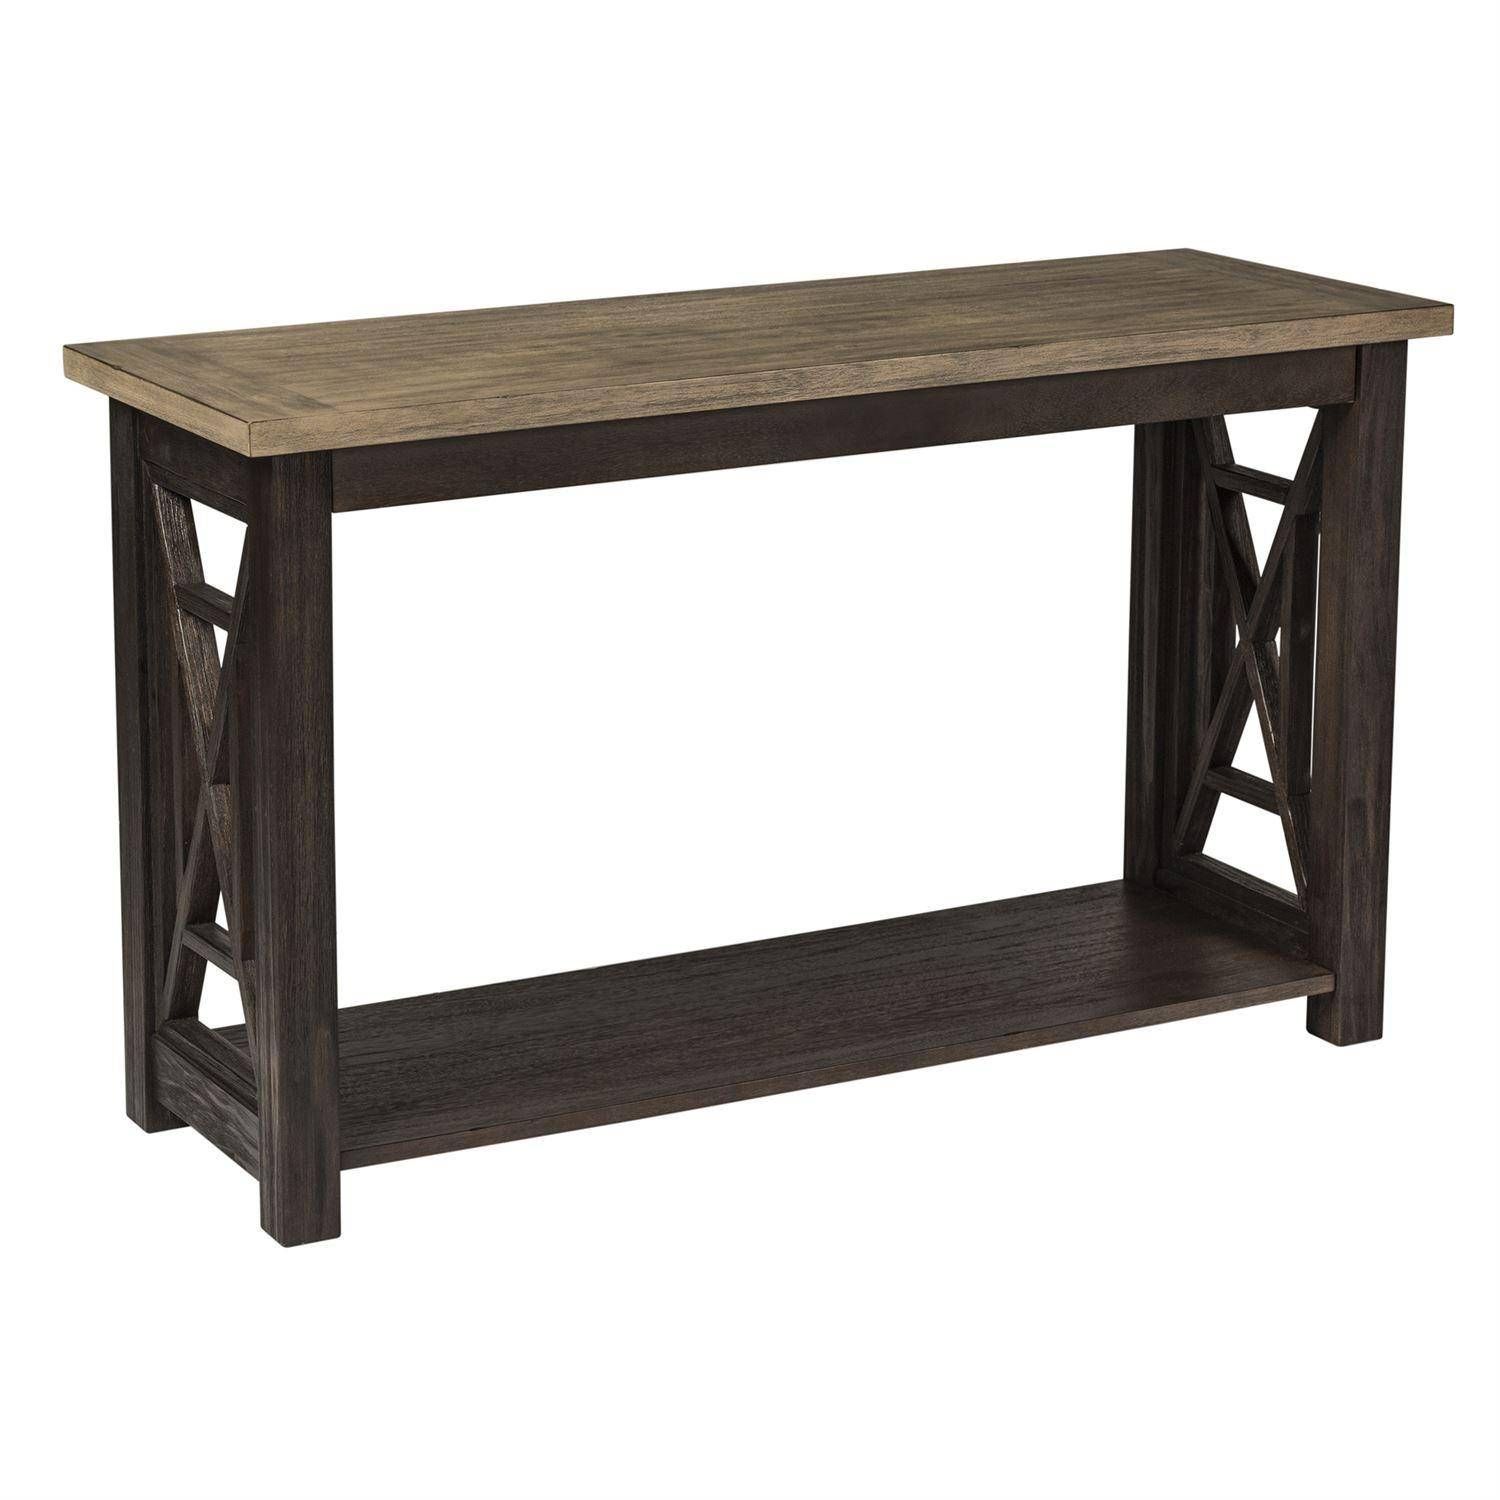 Transitional Gray Wood Console Table Heatherbrook (422 Ot) Liberty Inside Smoke Gray Wood Console Tables (View 2 of 20)